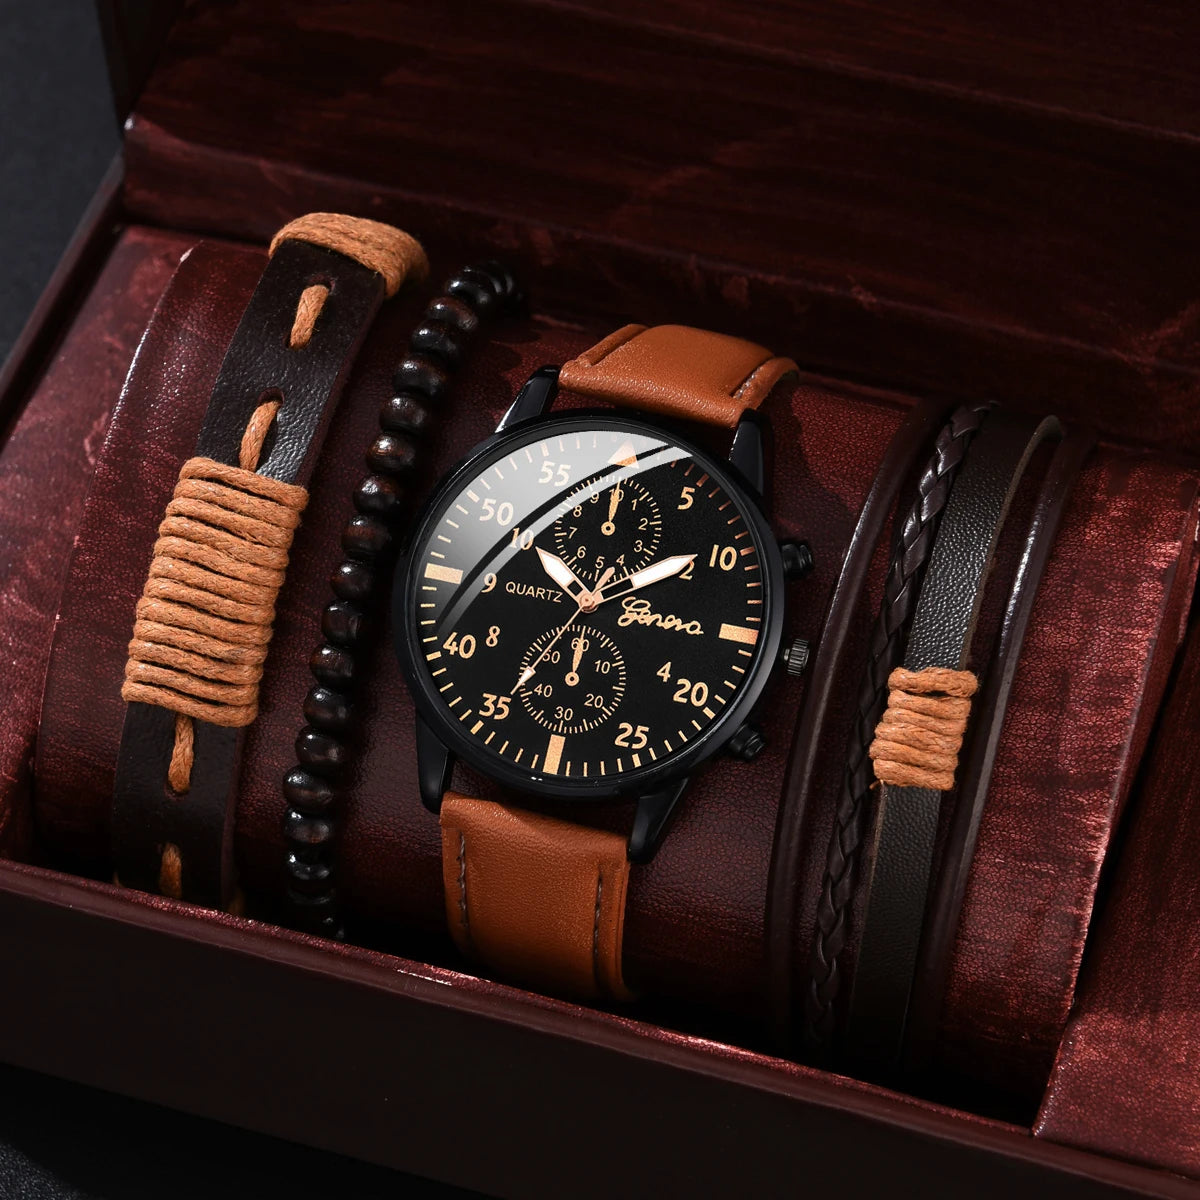 Luxury Set of 4 Men's Fashion Watches with Leather Bands - Elegant Gift for Him  OurLum.com   